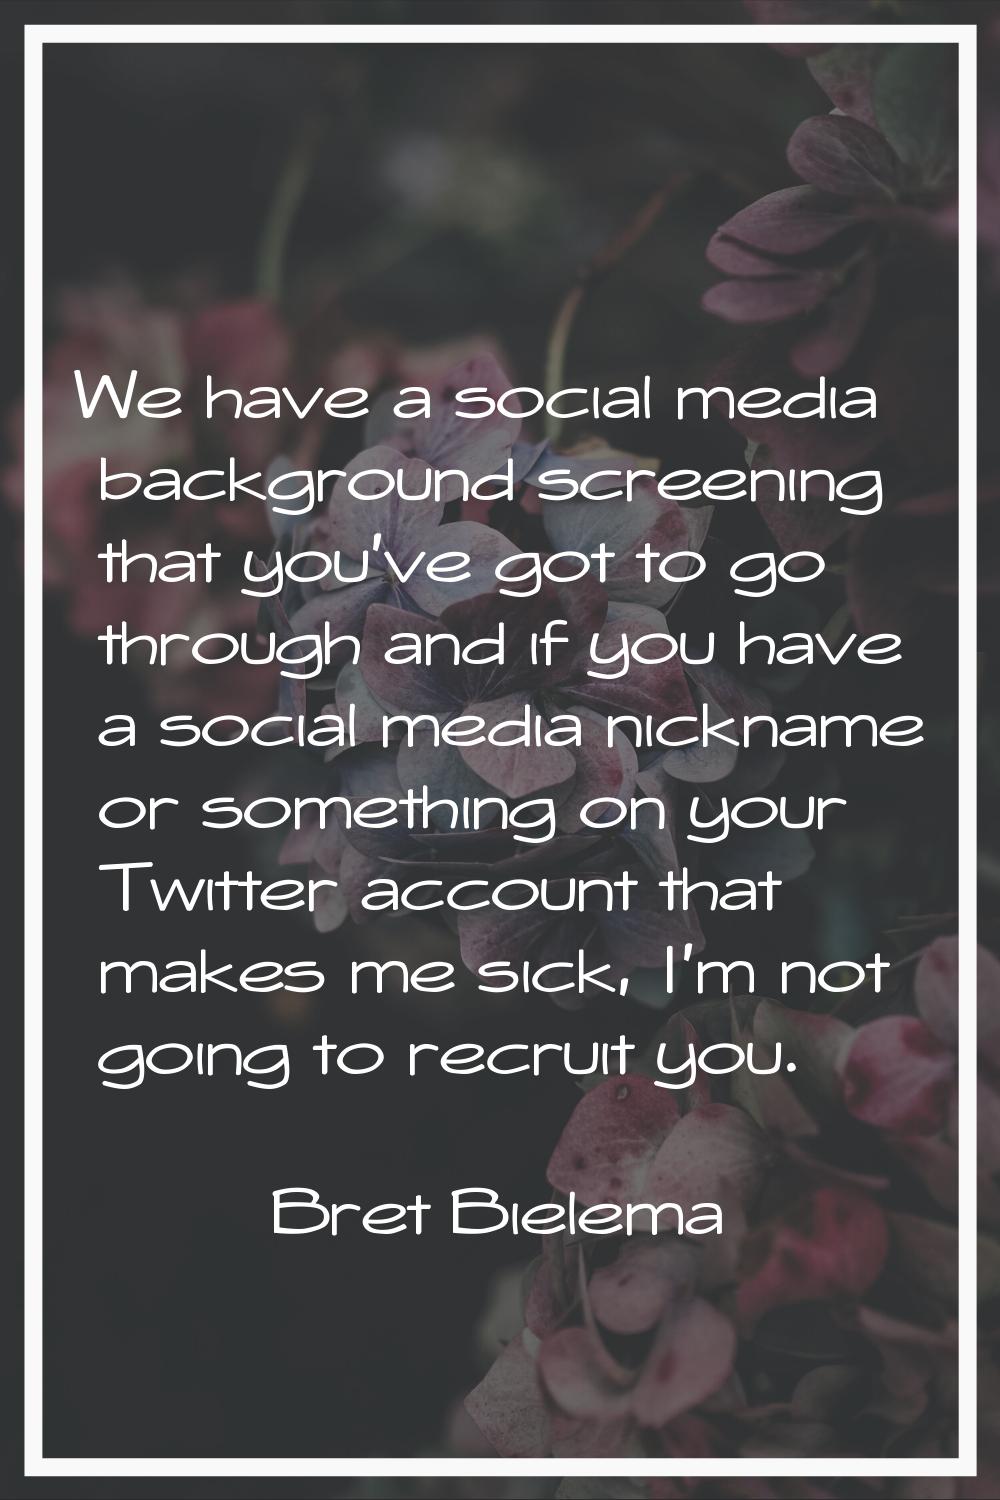 We have a social media background screening that you've got to go through and if you have a social 